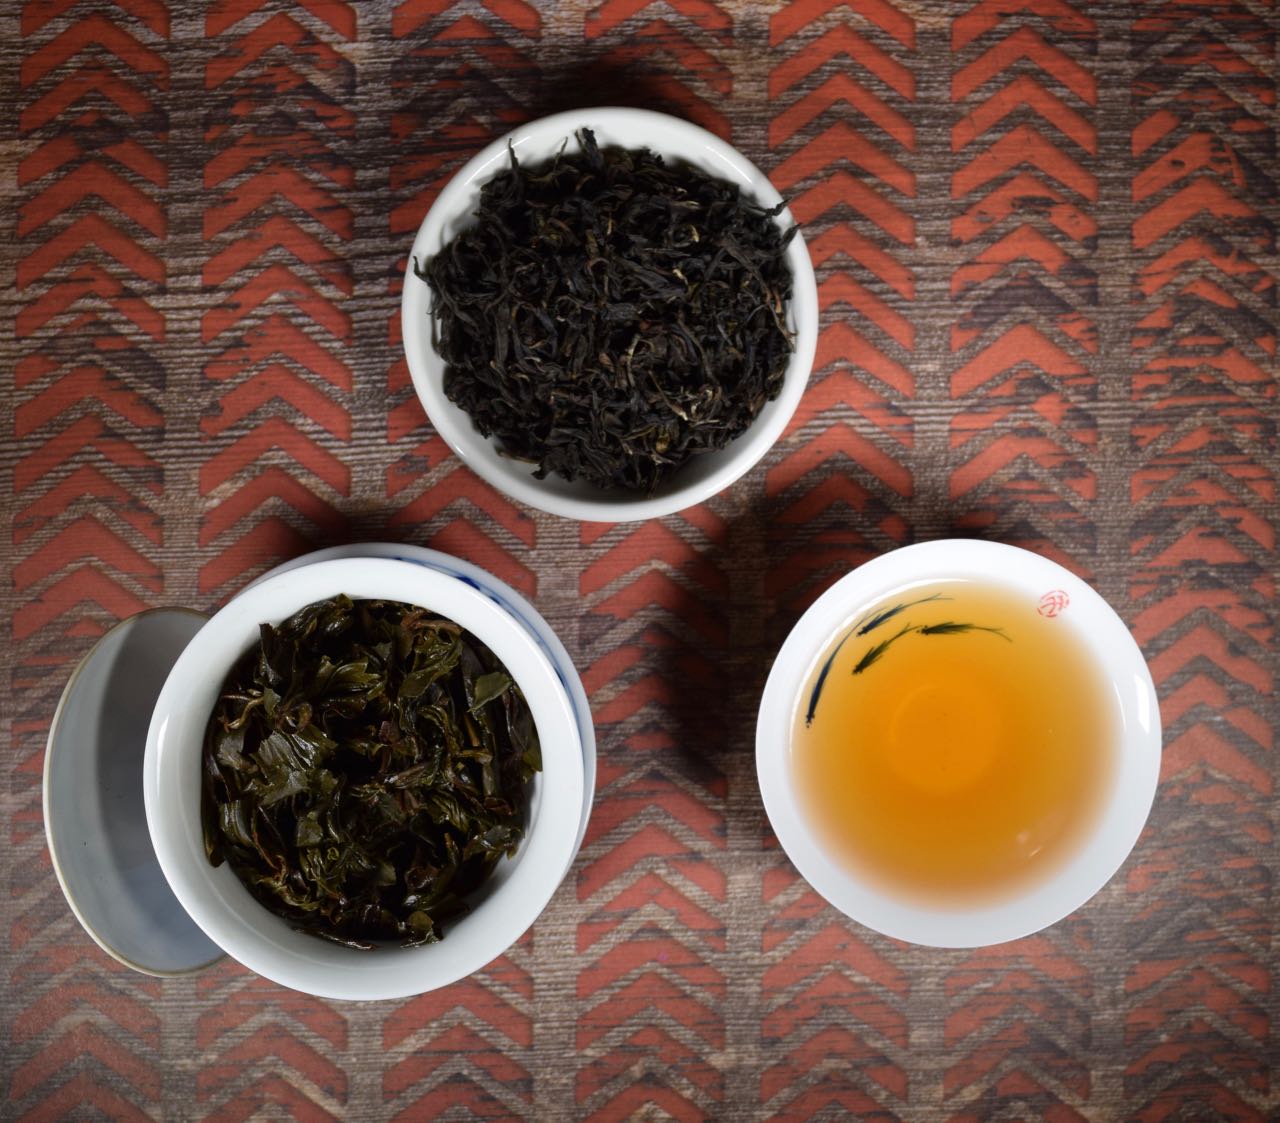 Big Red Robe, Gongfu, Oolong Tea, Whole Dry Leaf, Wet Leaf, and Infusion, Miami.Coffee